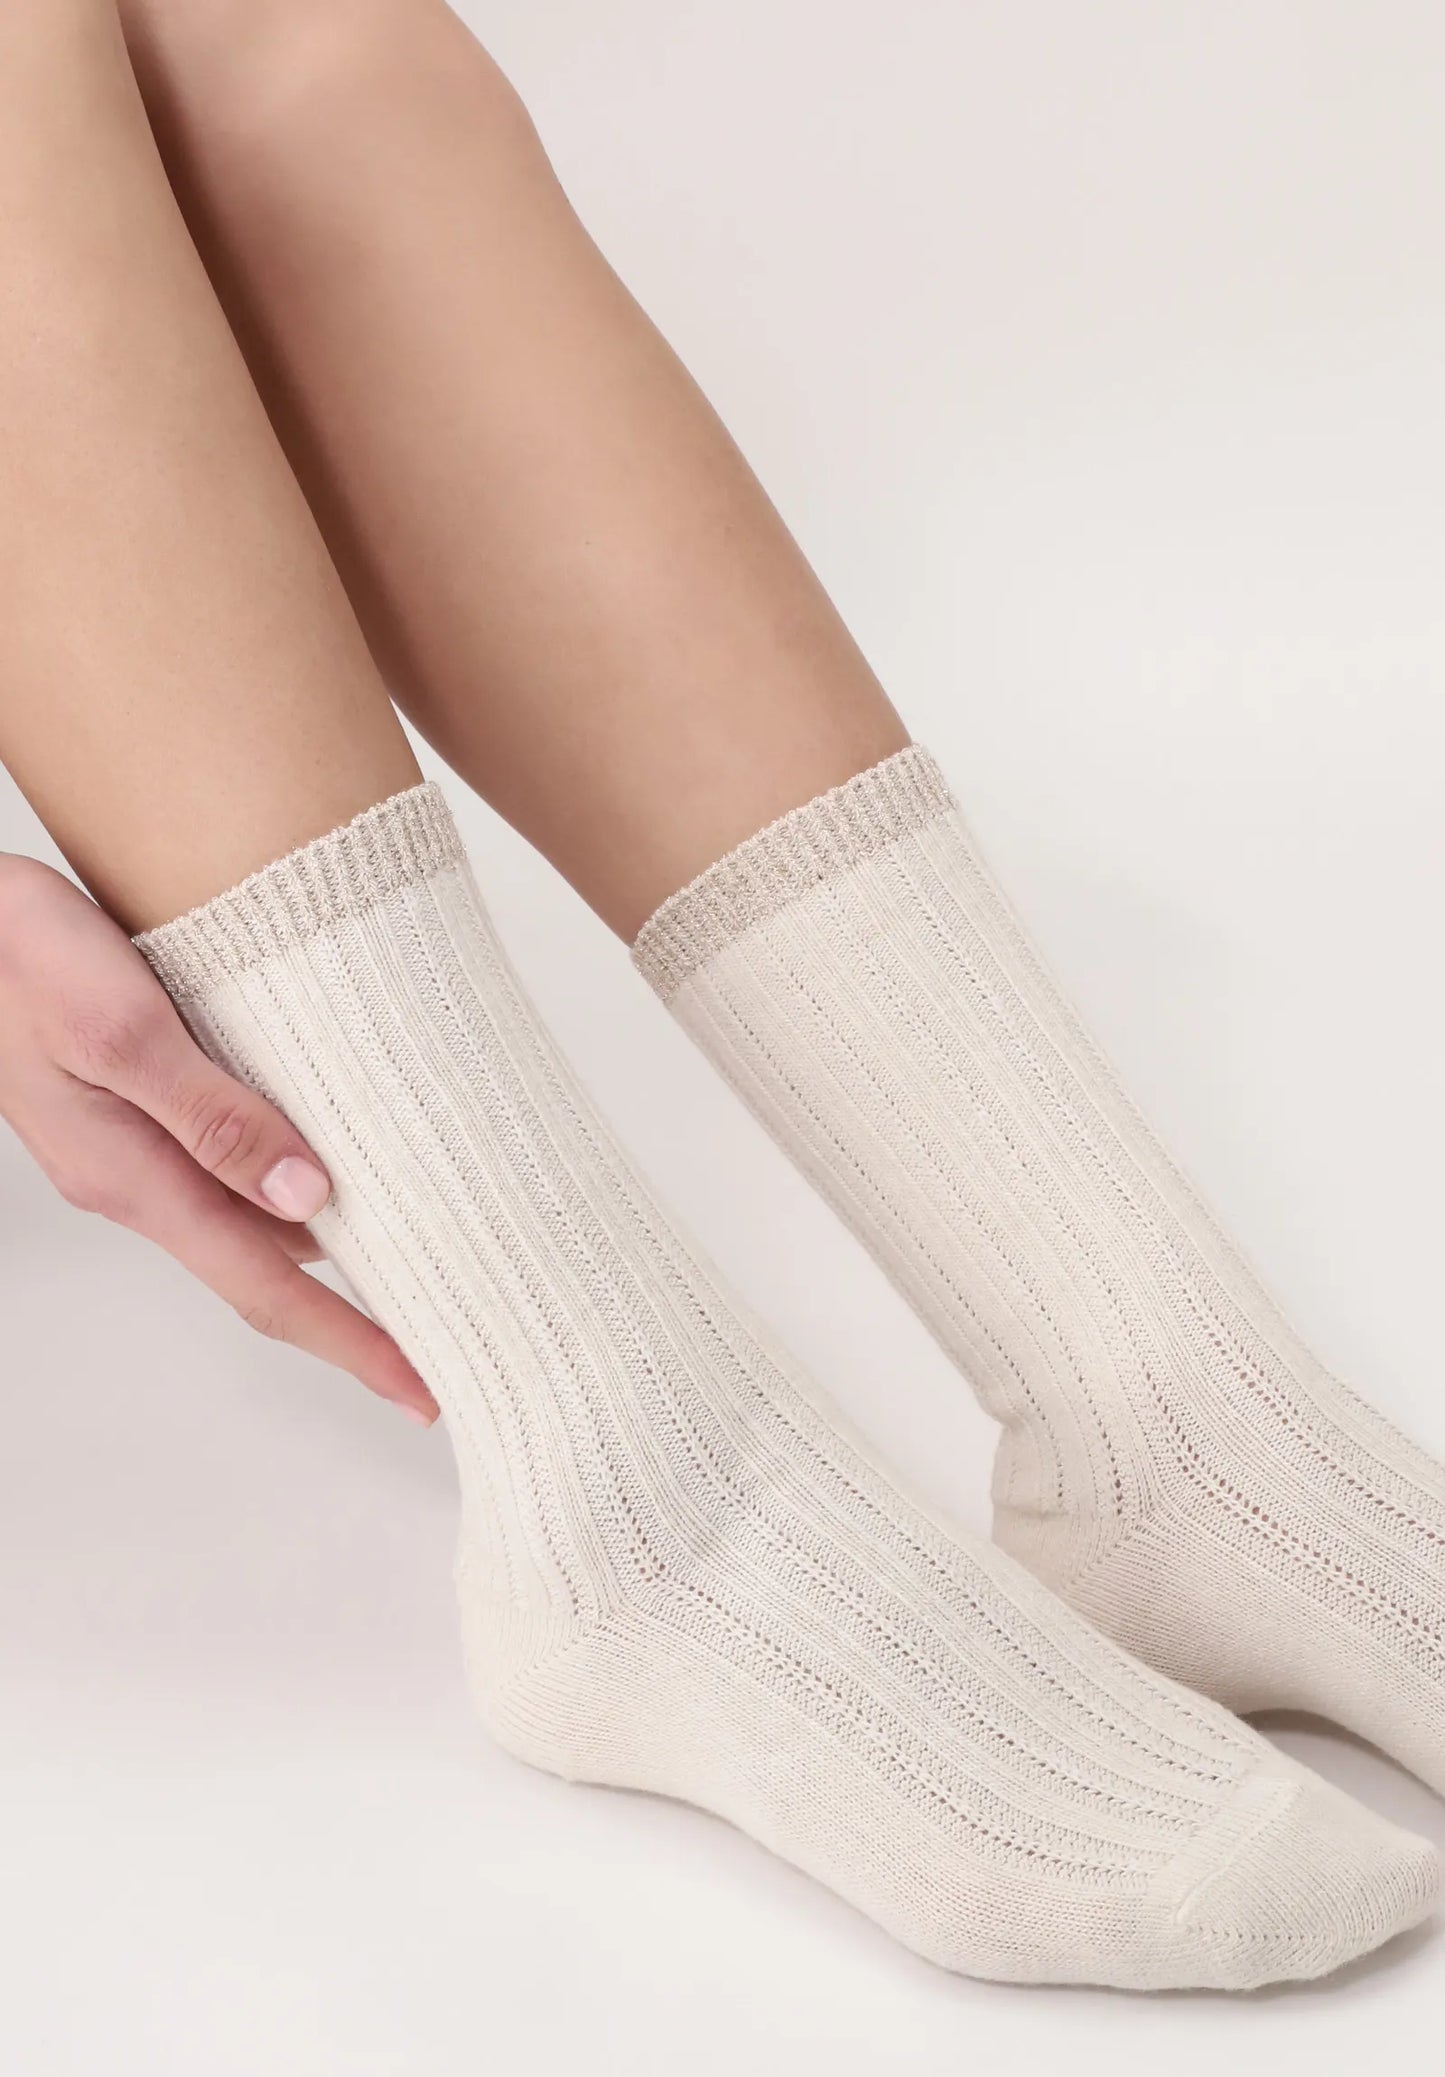 OroblÌ_ Jasmine Sock - Ultra soft and warm ivory cream thermal cable ribbed knitted ankle socks with a touch of alpaca, sparkly gold lurex cuff.